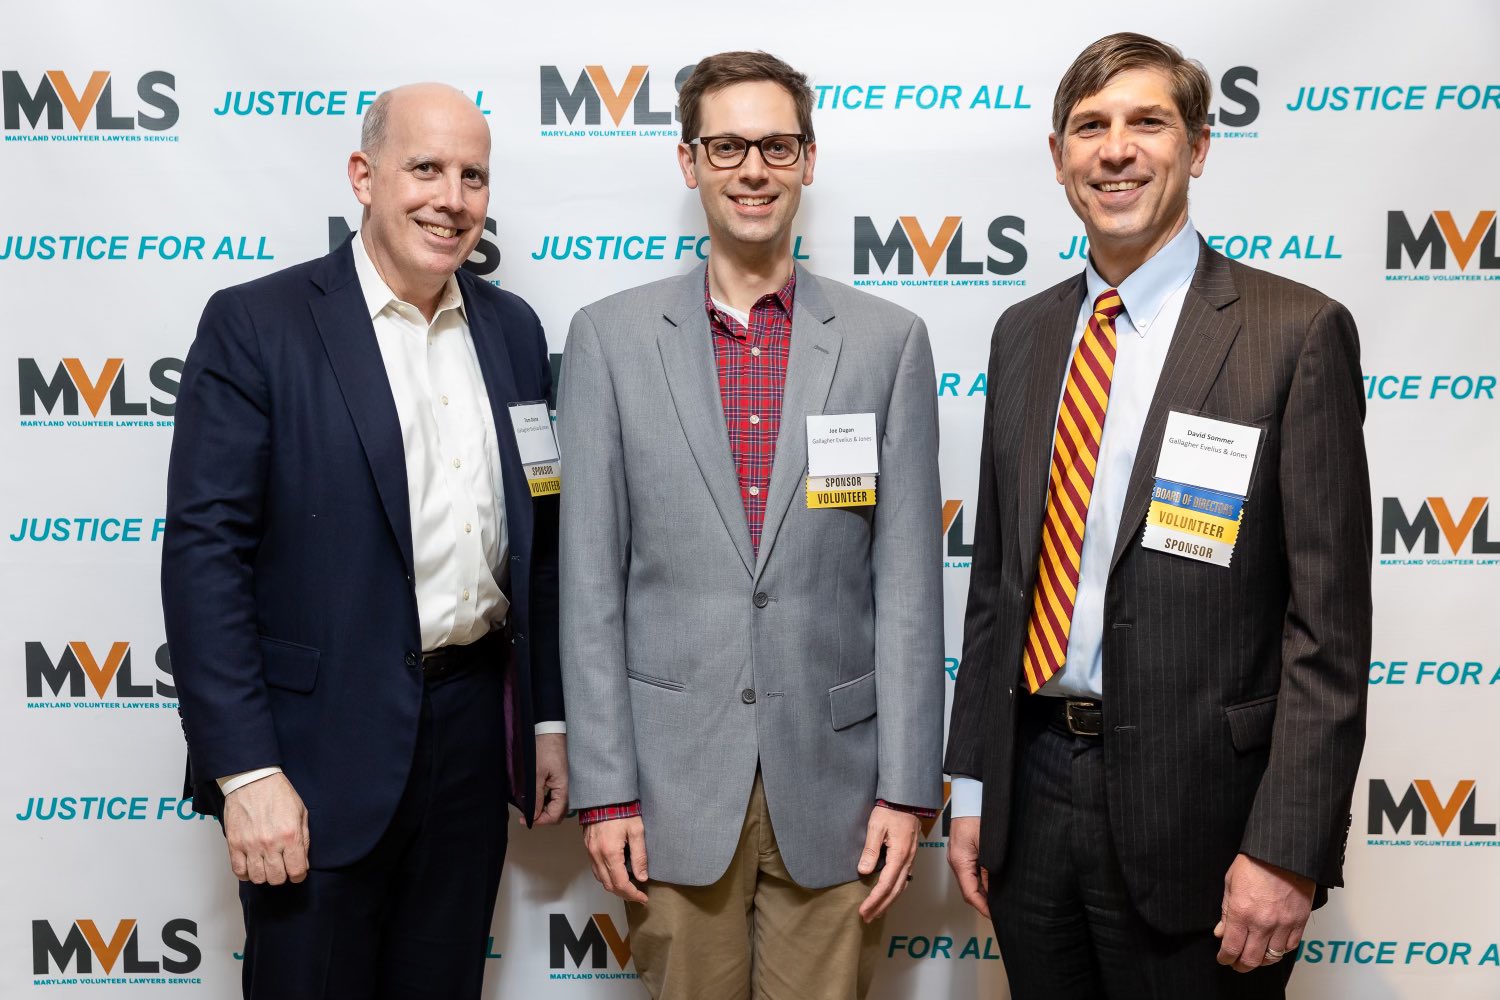 MVLS is thrilled to - Maryland Volunteer Lawyers Service